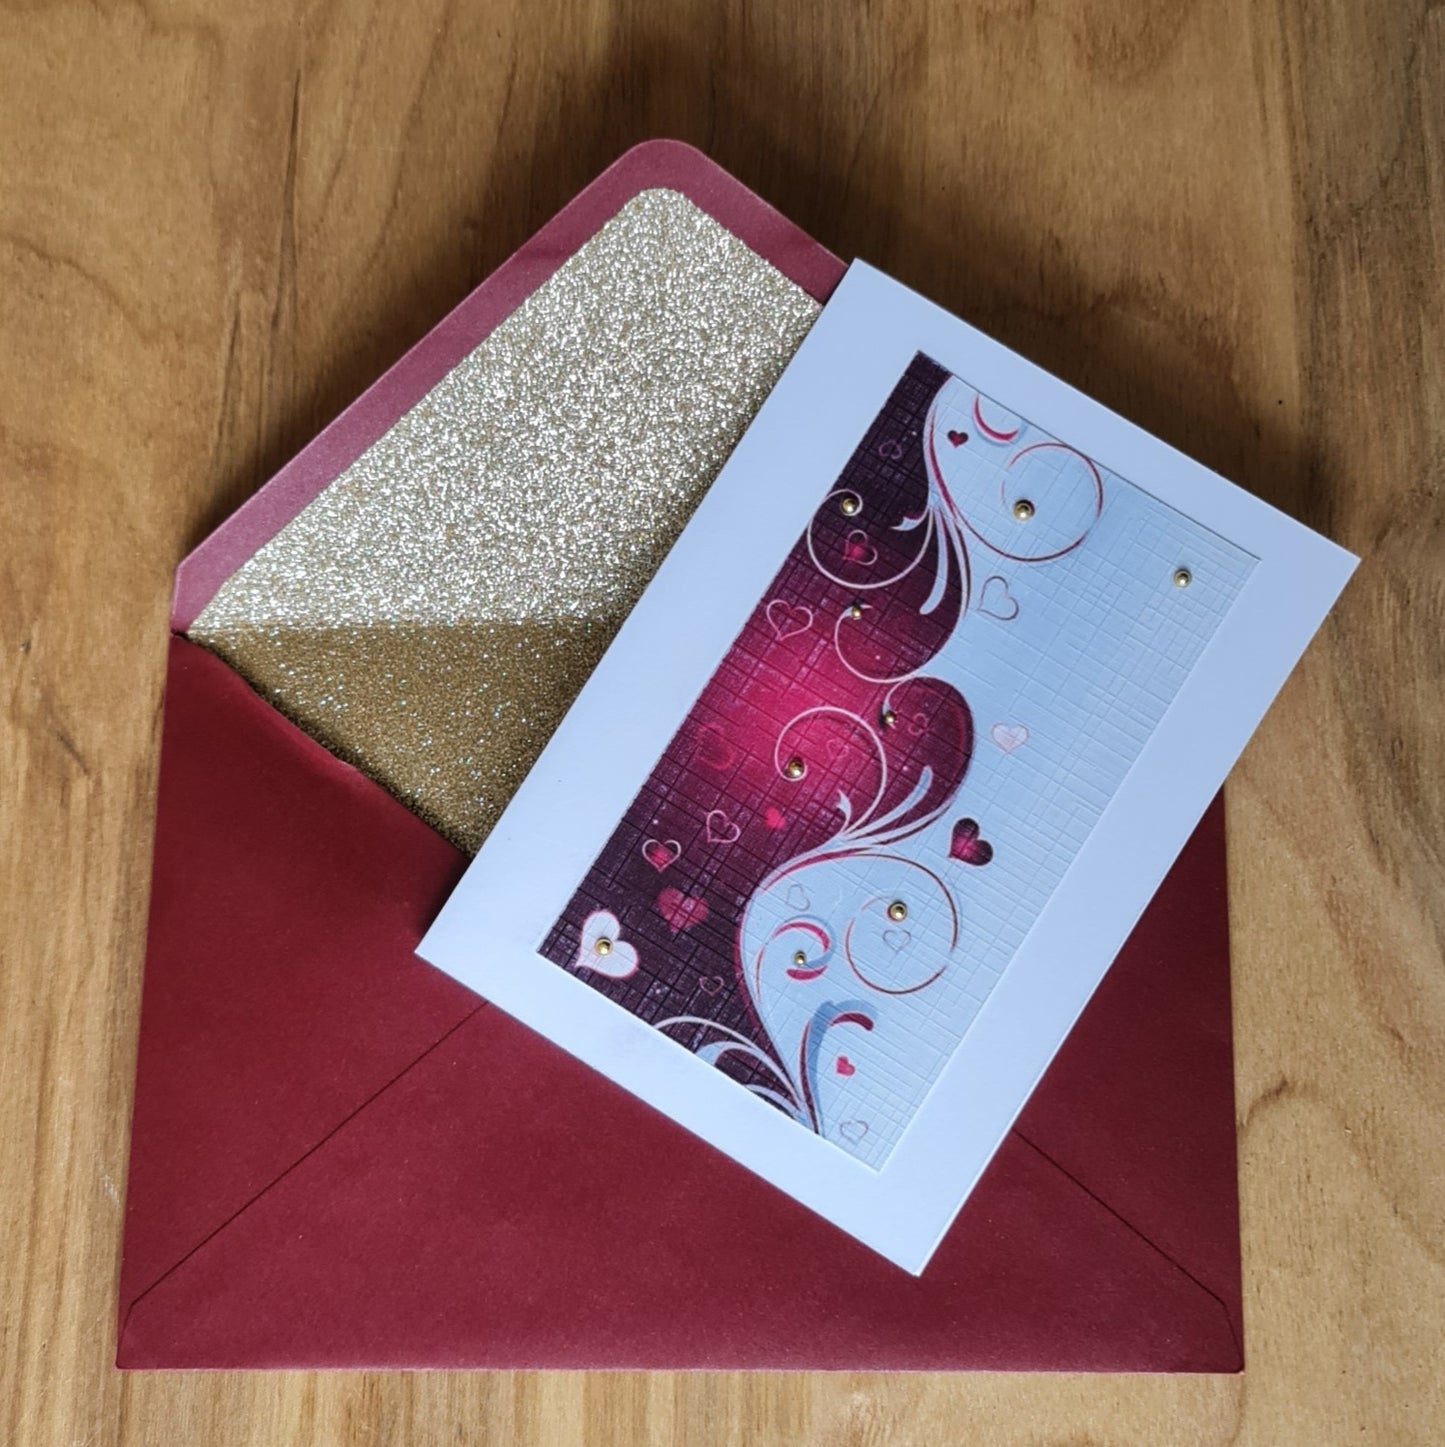 Greeting card (10.5 x 15 cm) with red and white image and envelope (13.5 x 19.5 cm) with poppy flowers and gilded edge (APU2)